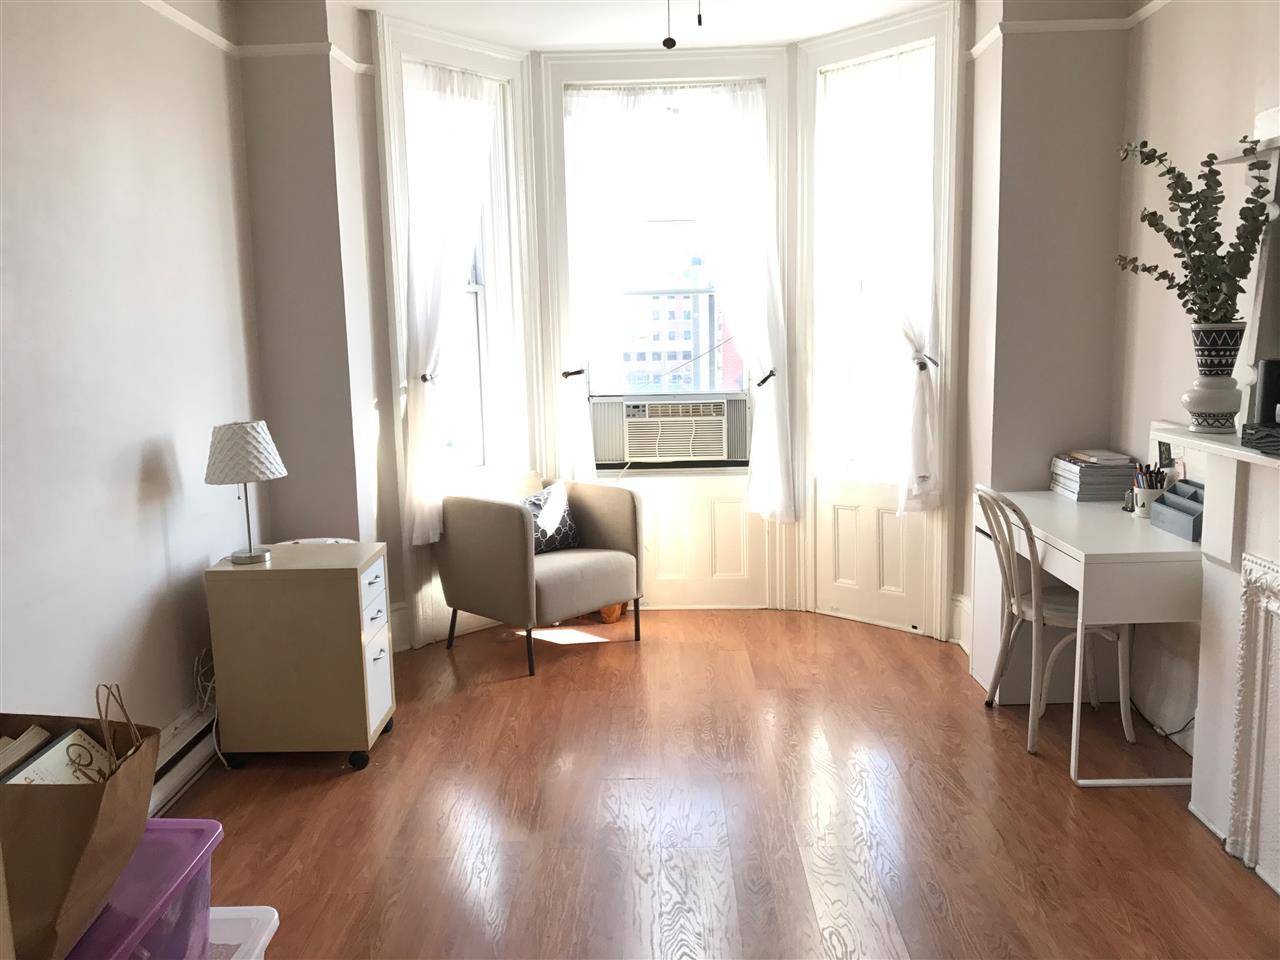 Location - 1 BR New Jersey